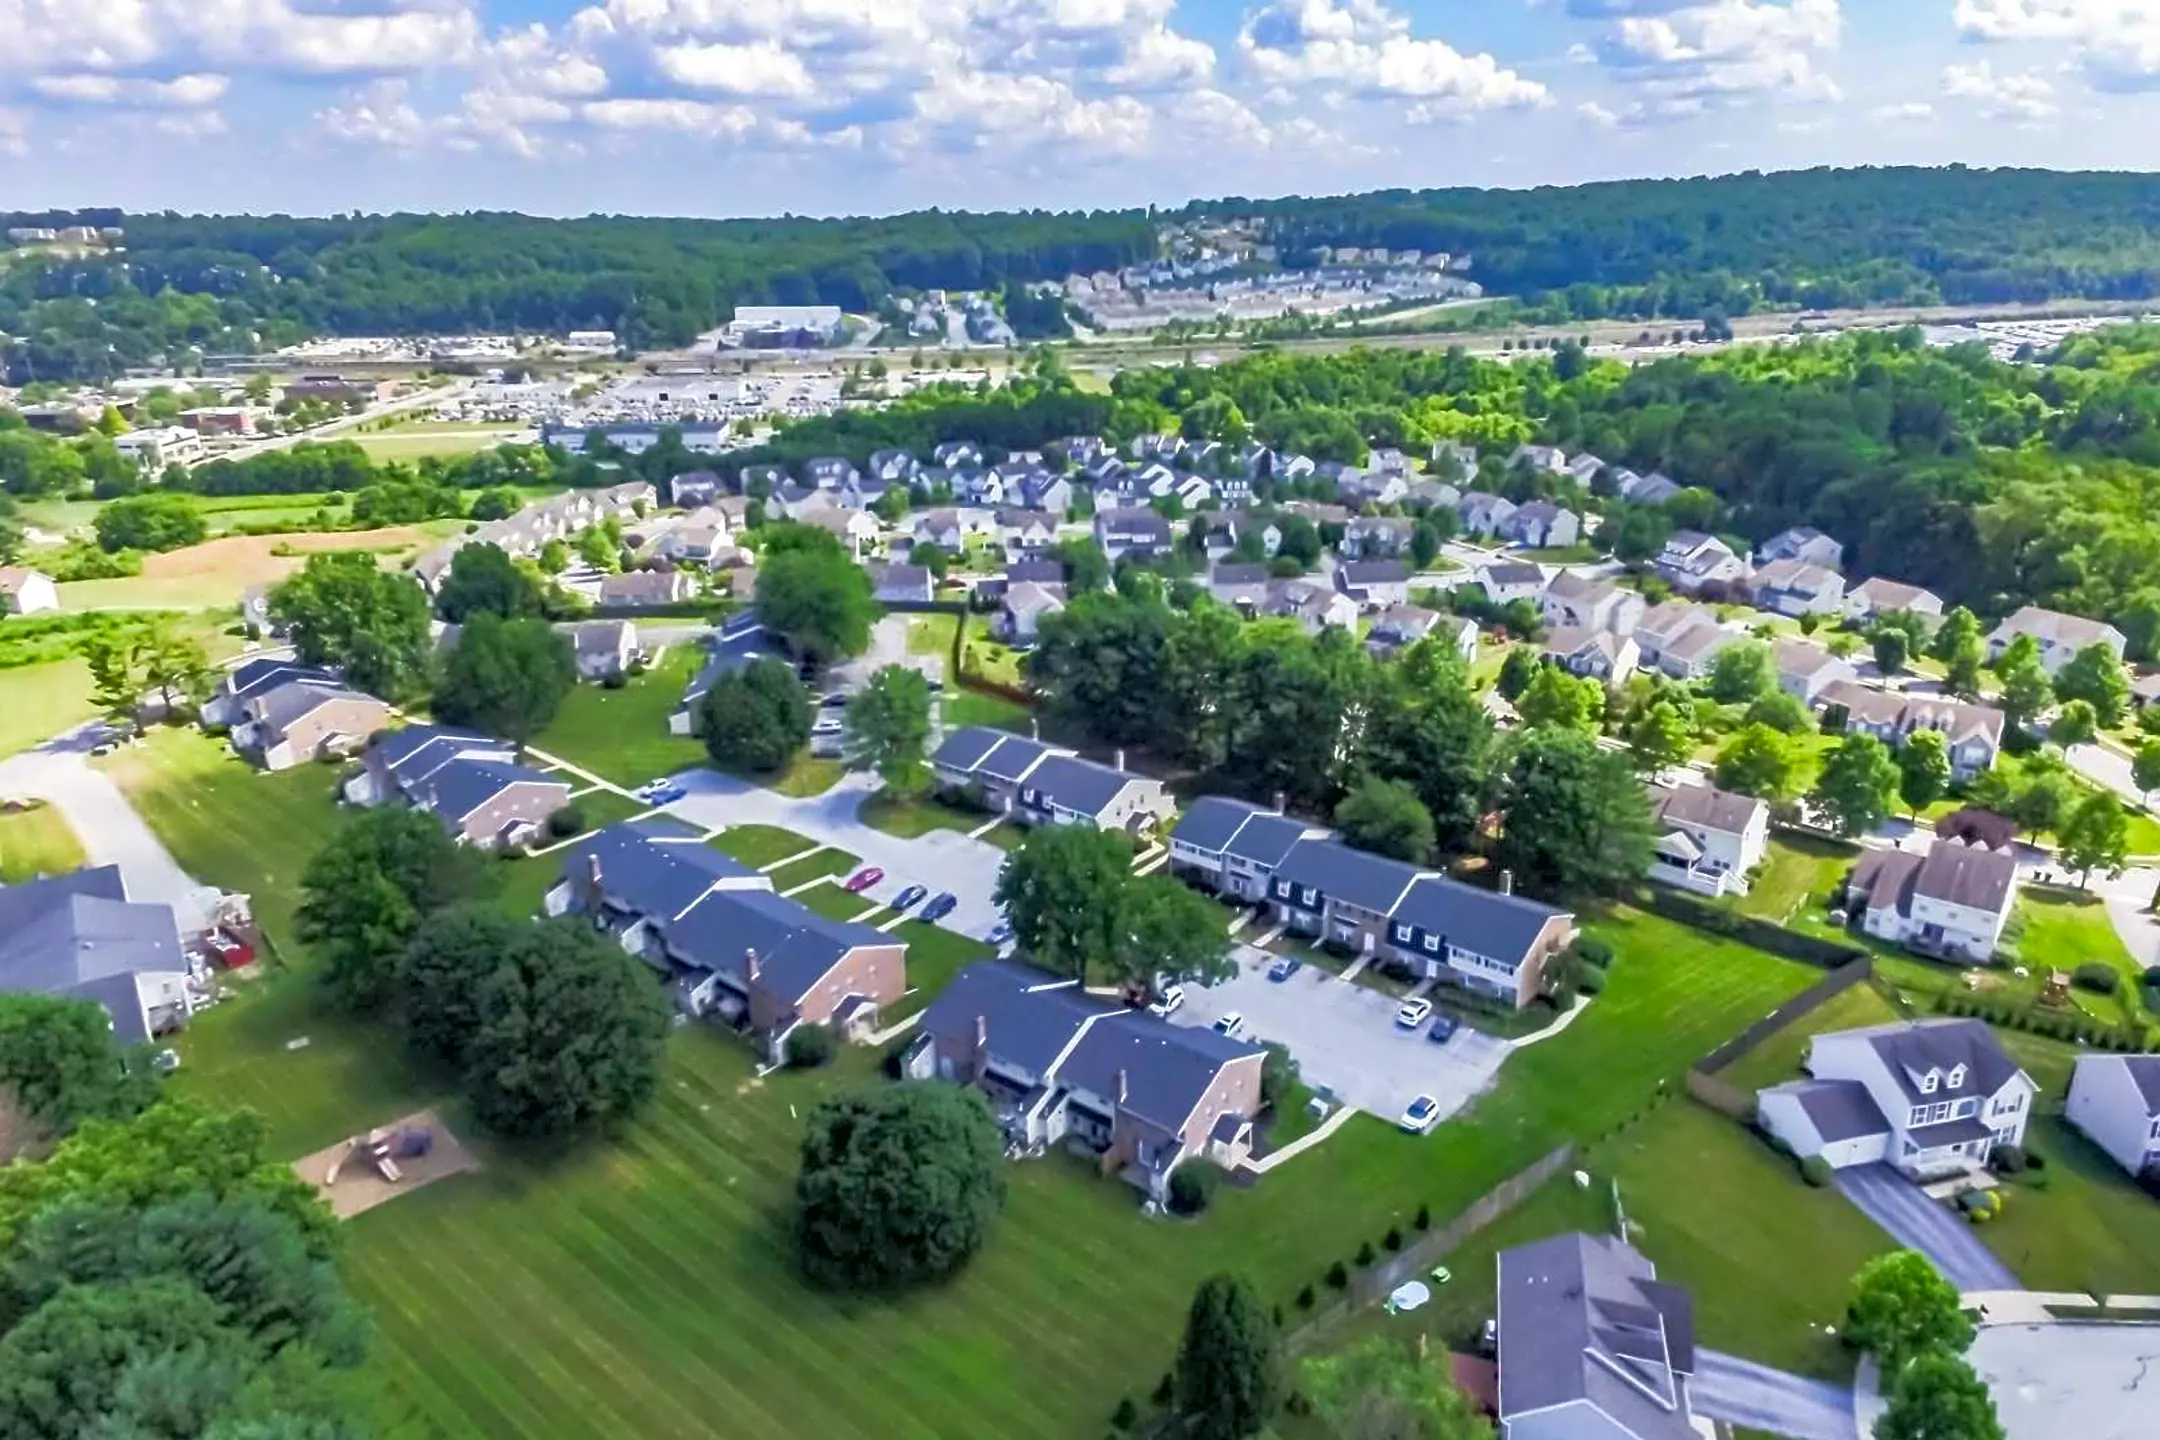 Building - The Fairways Apartments & Townhomes - Thorndale, PA